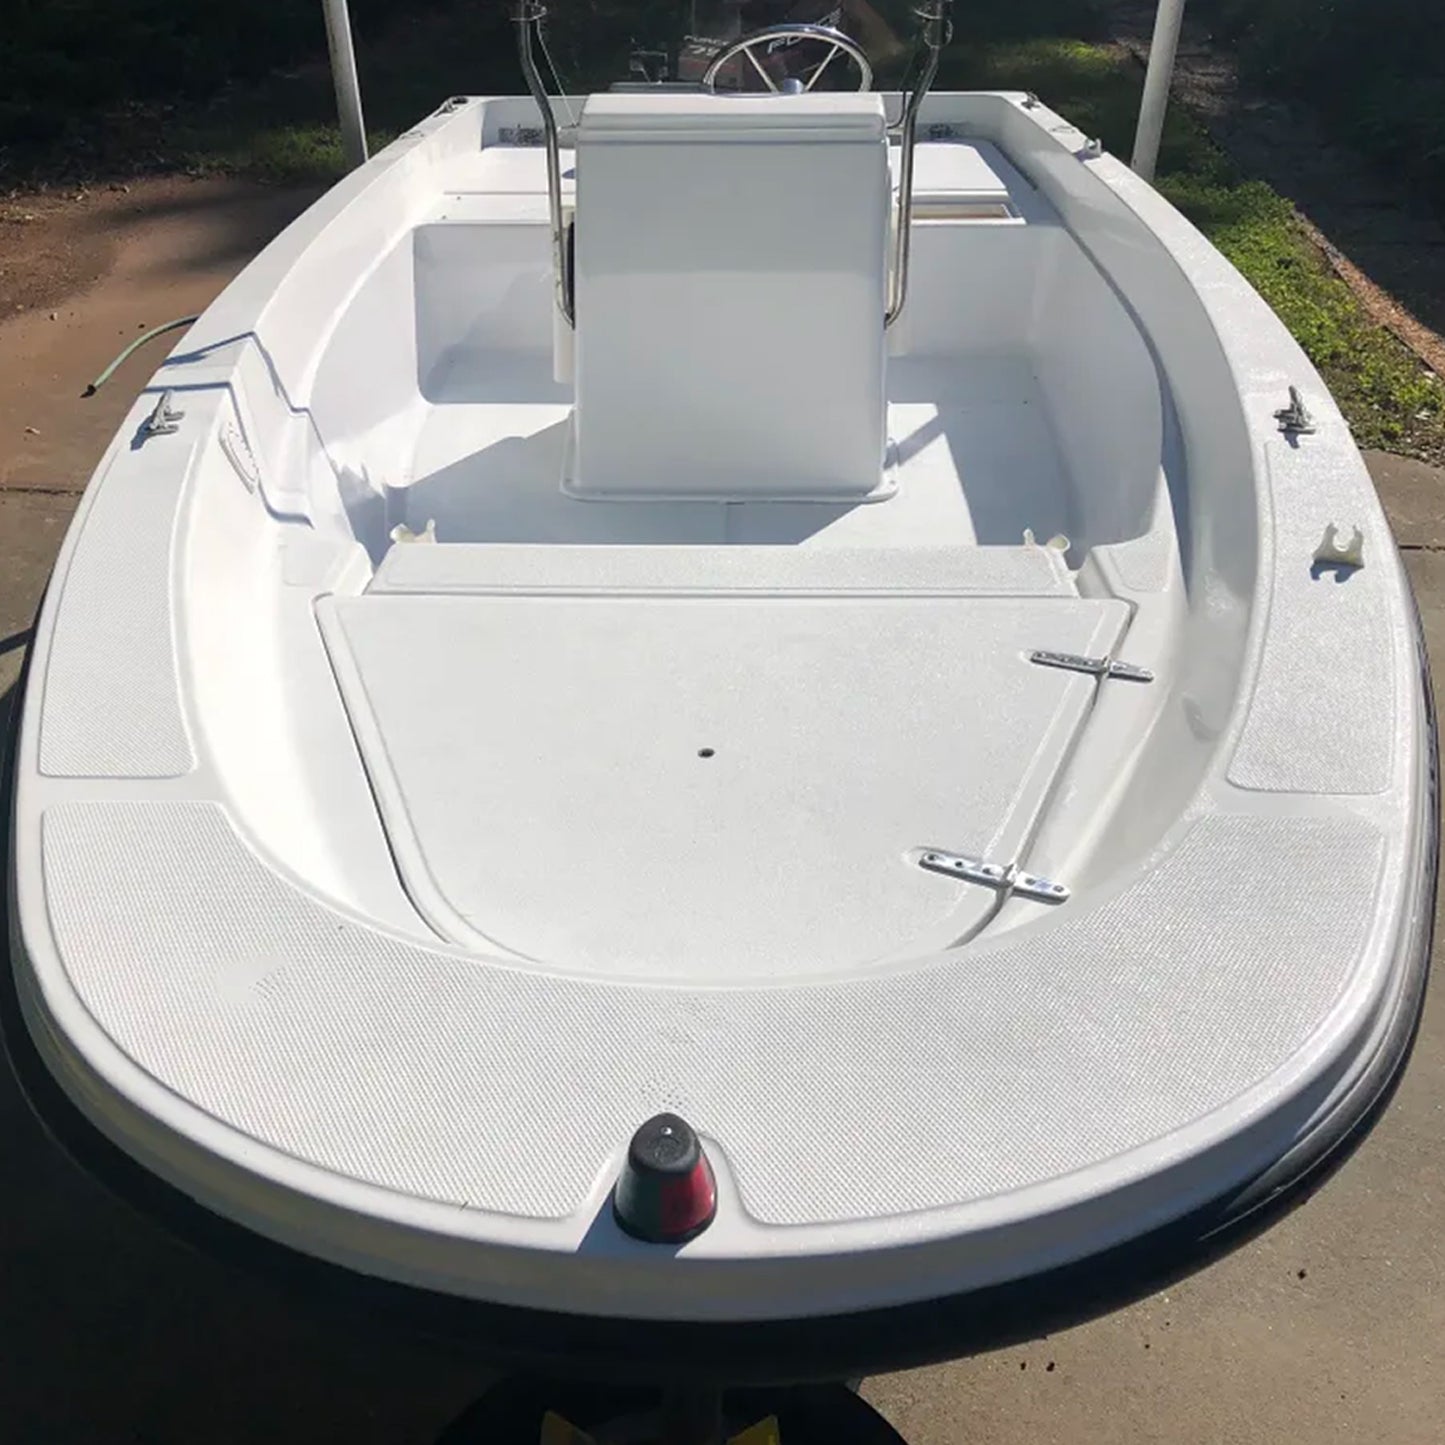 TotalBoat TotalTread Non-Skid Marine Deck Paint white on a finished boat